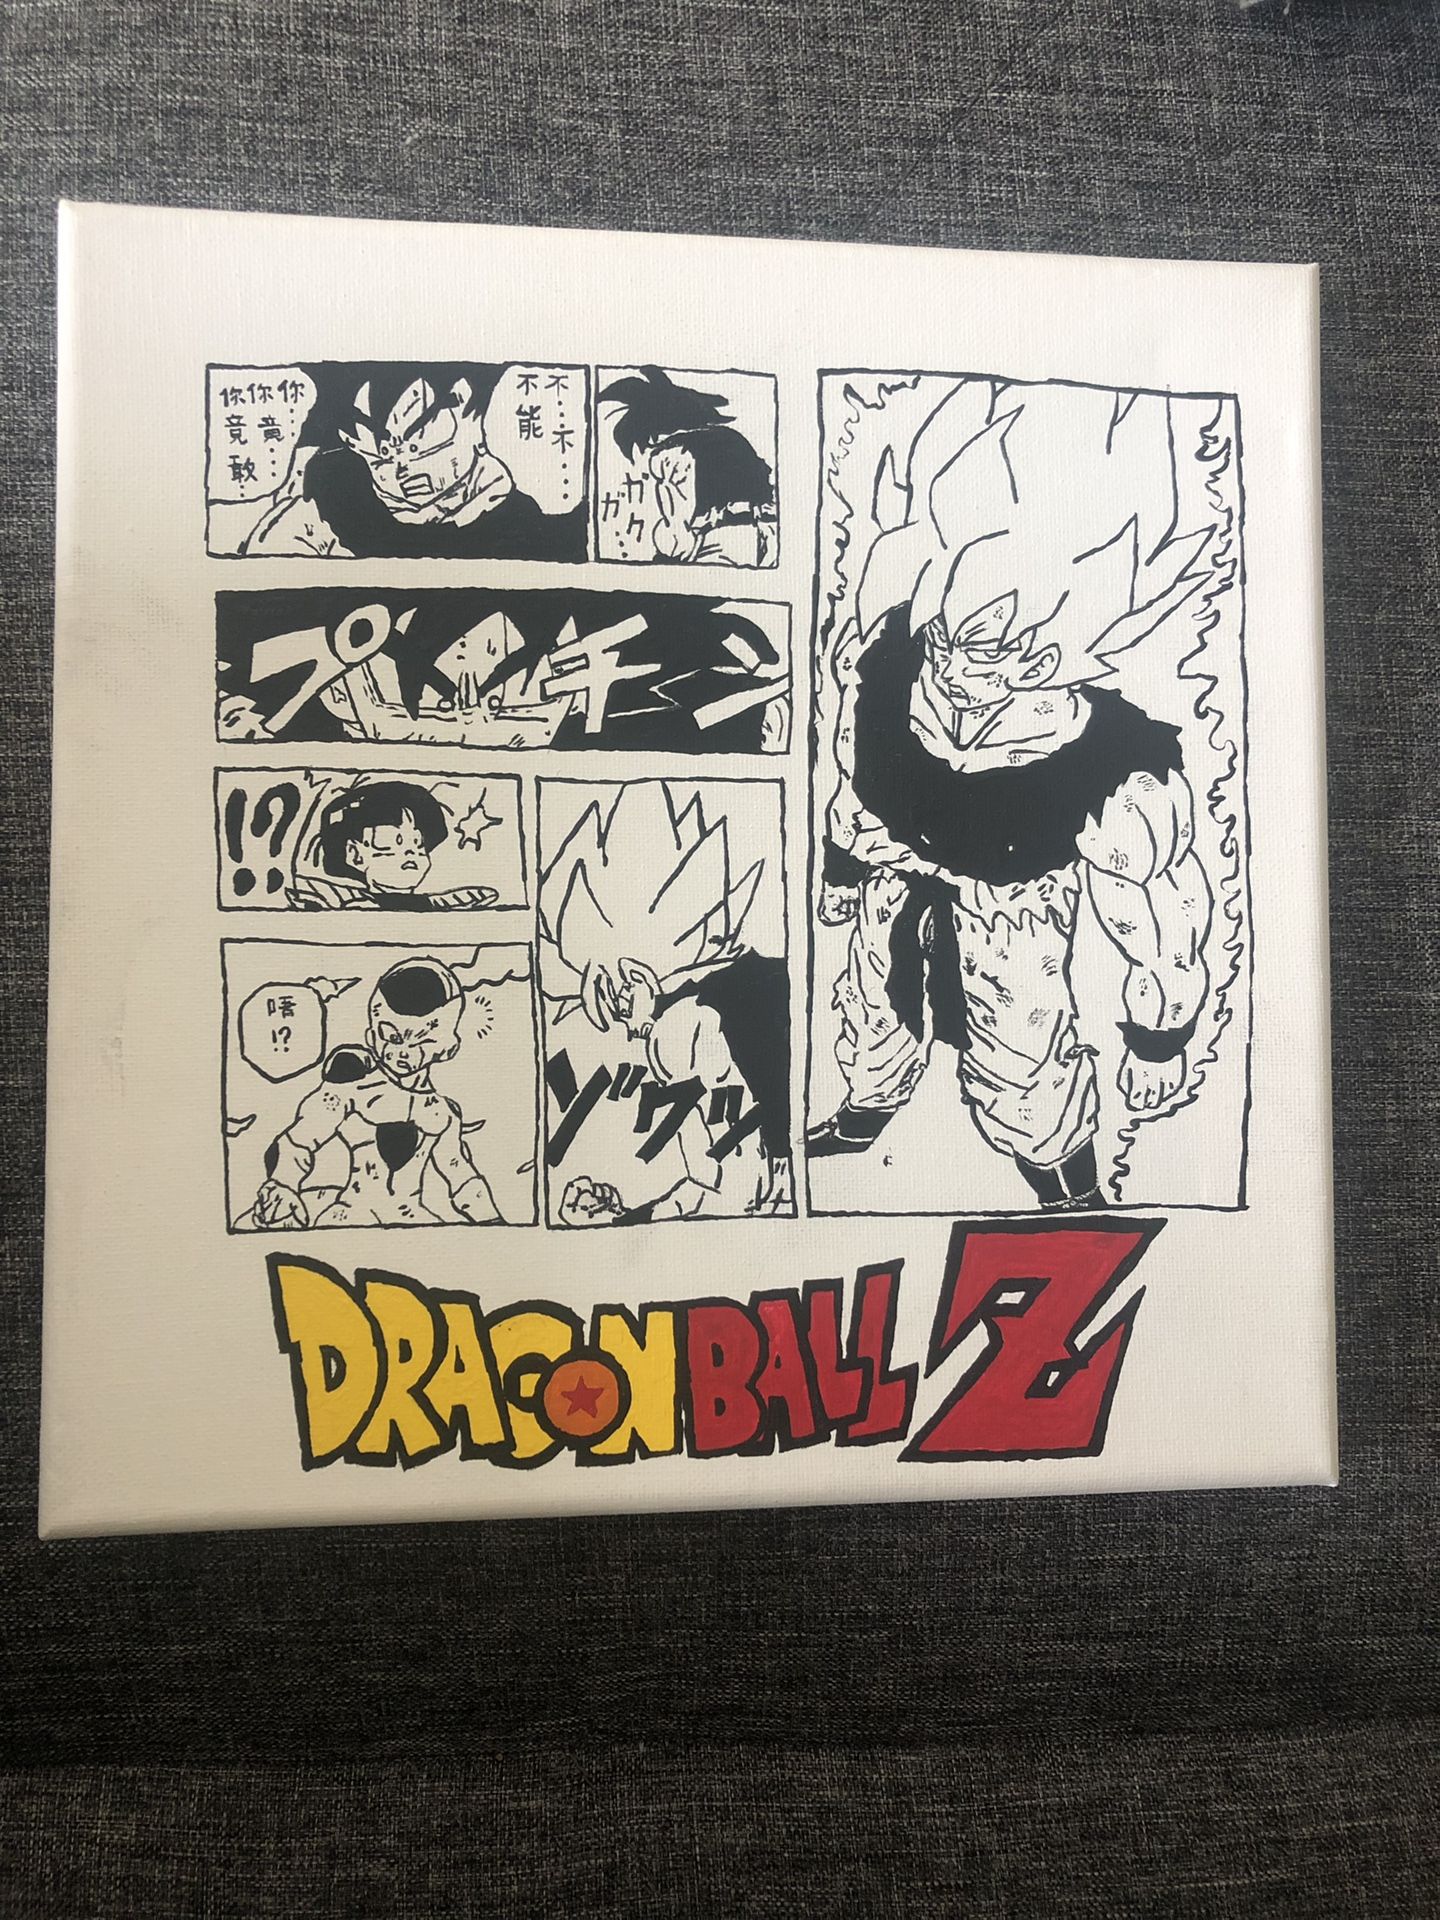 Dragonball Z hand painted canvas 10x10